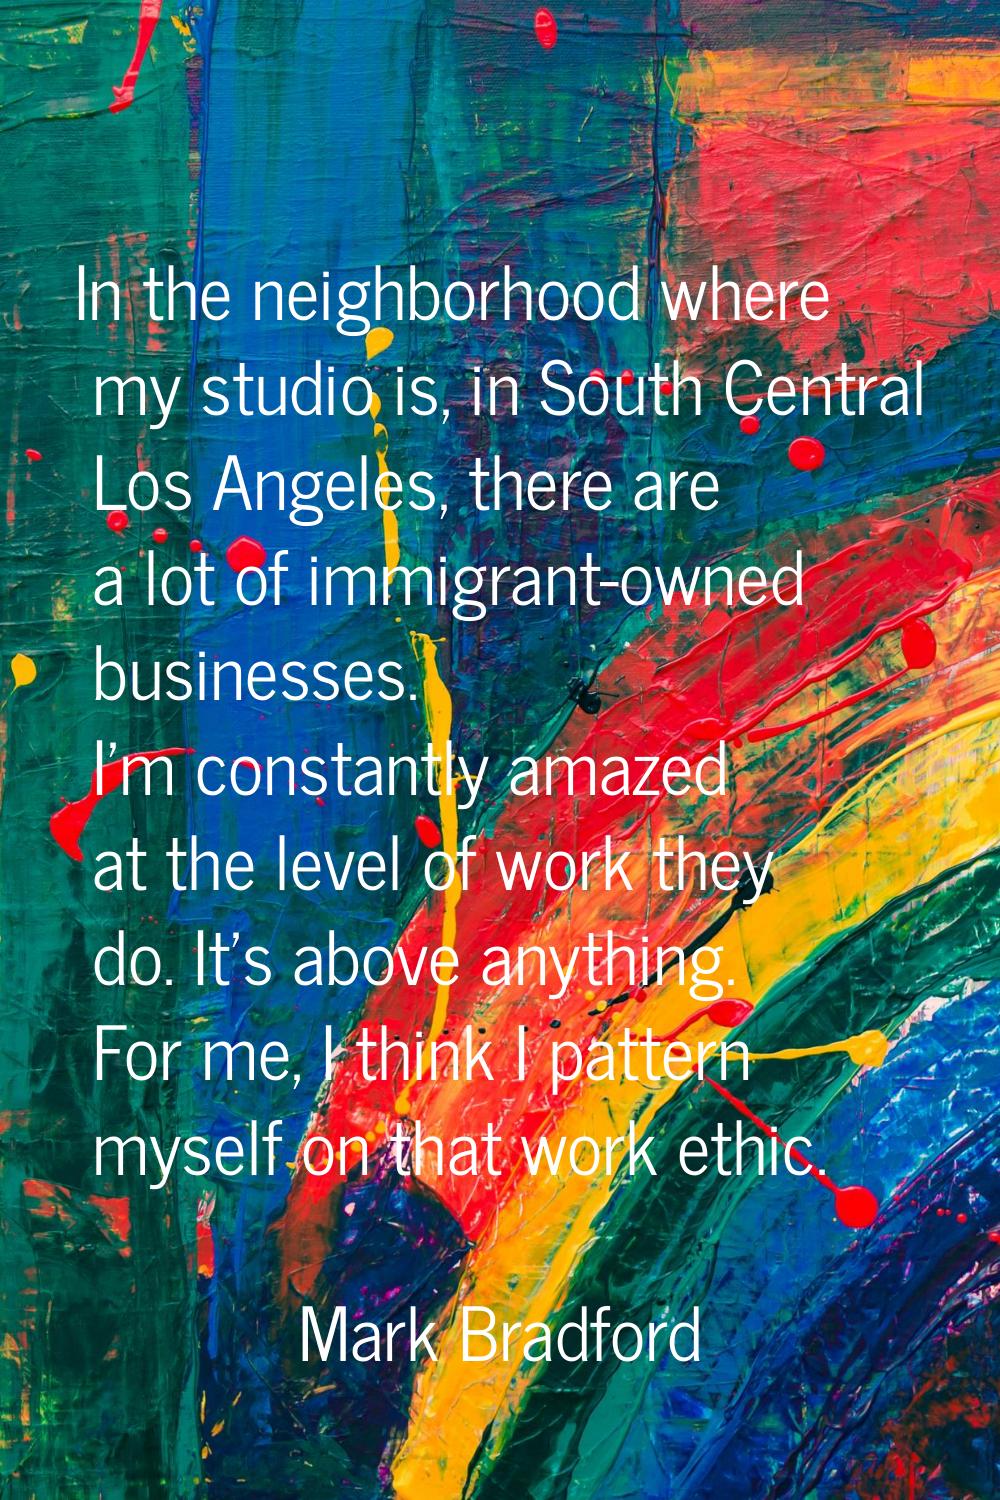 In the neighborhood where my studio is, in South Central Los Angeles, there are a lot of immigrant-